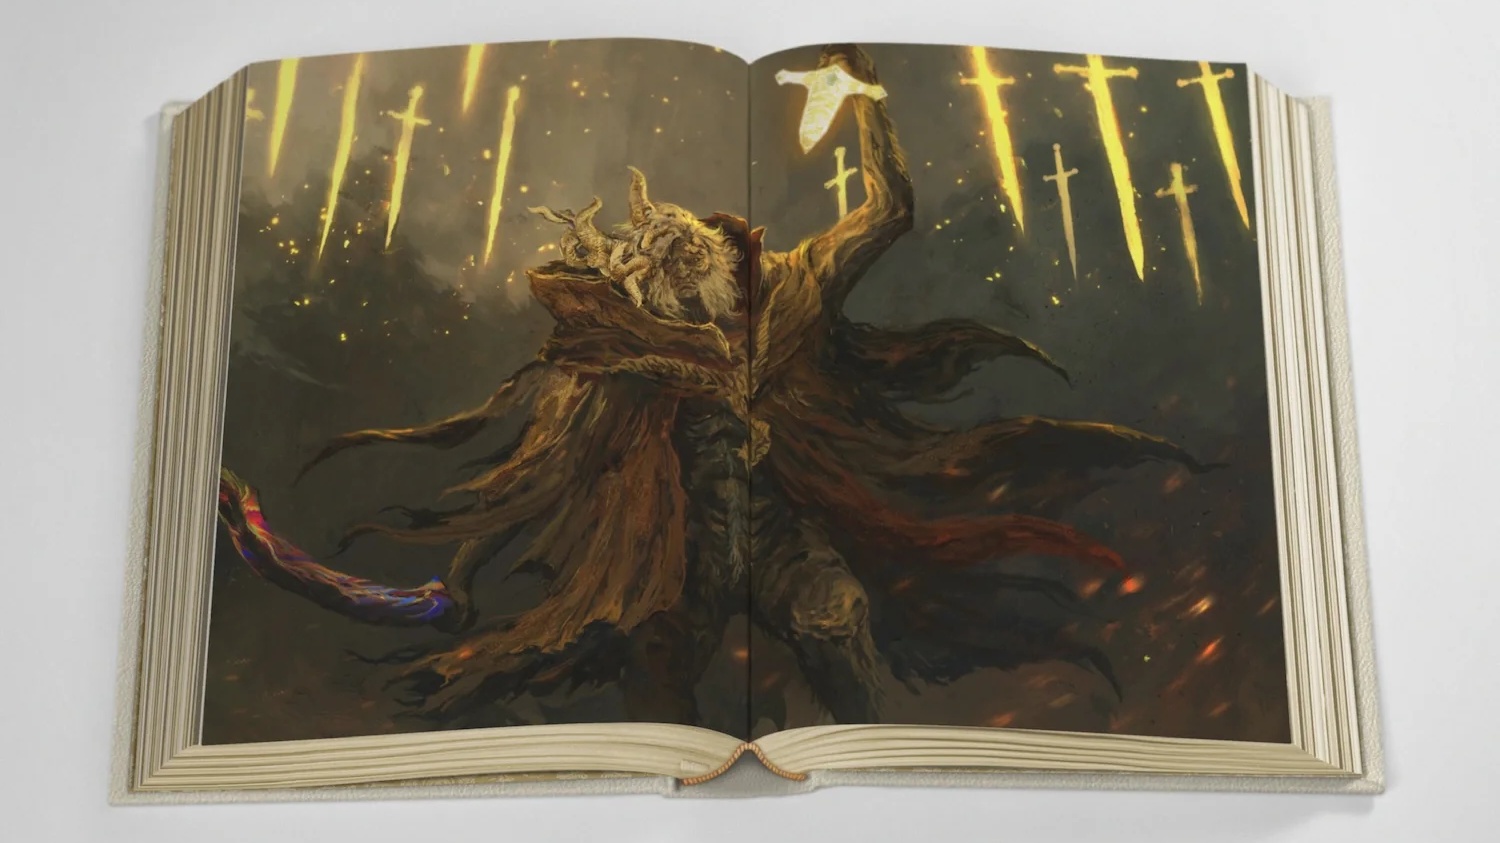  Alright, who wants to spot me $1,000 for this absurdly sumptuous Elden Ring lore book? 